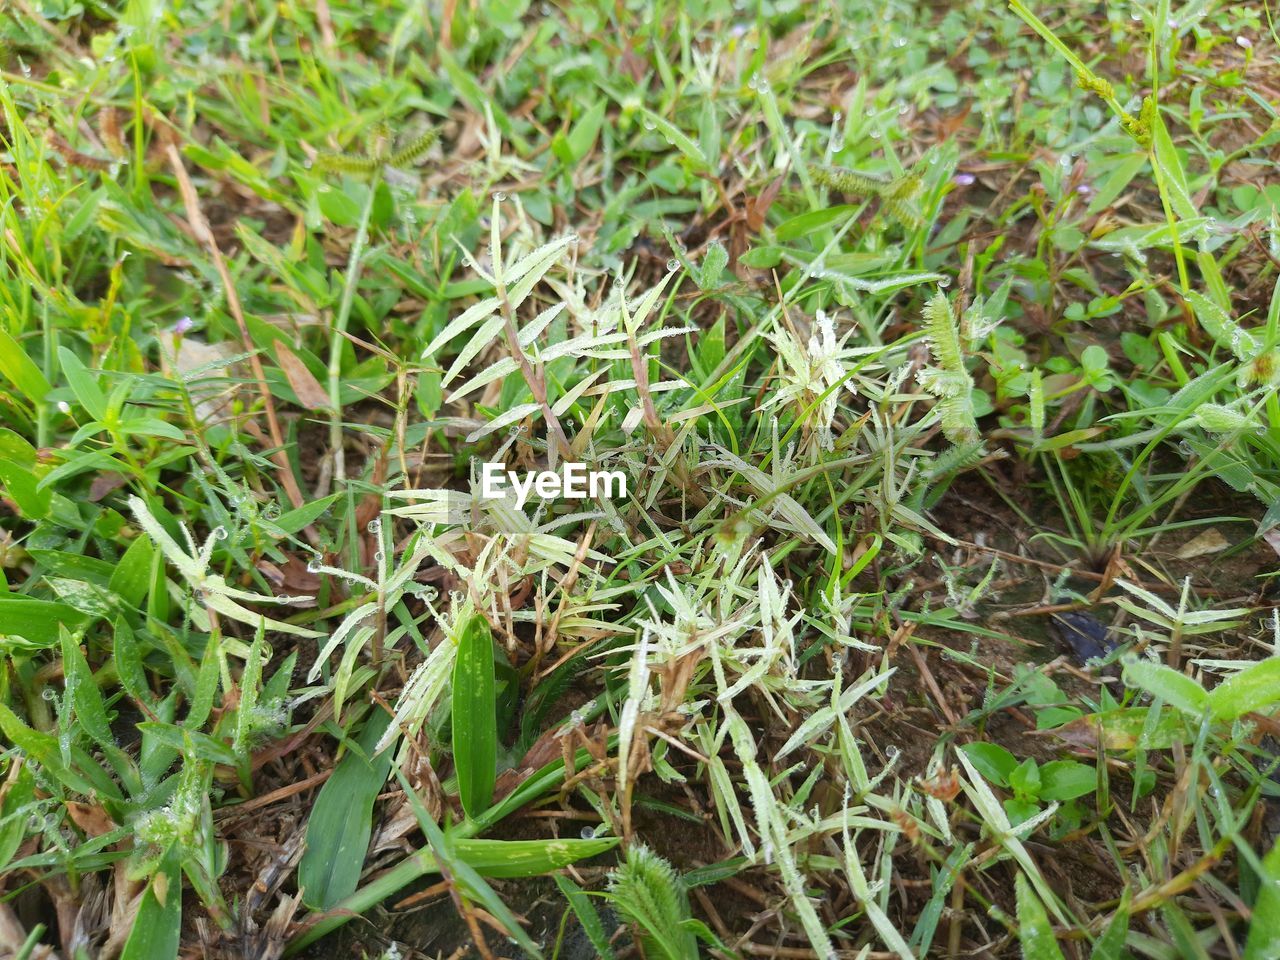 HIGH ANGLE VIEW OF GRASS